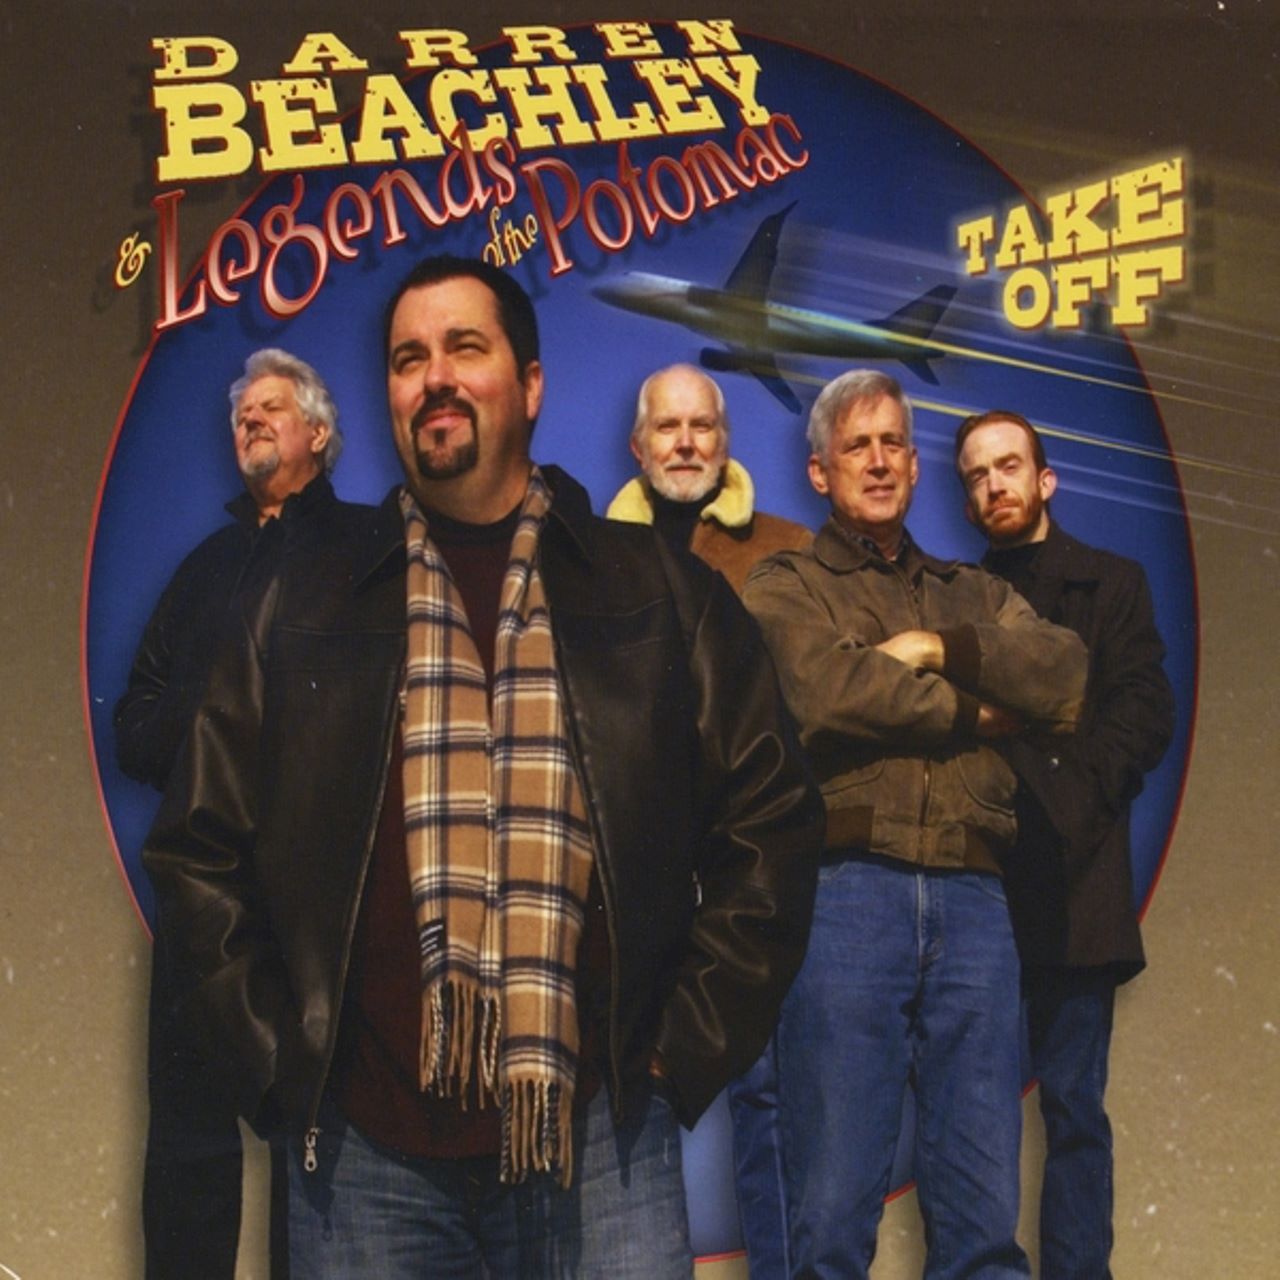 Darren Beachley & The Legends Of The Potomac - Take Off cover album